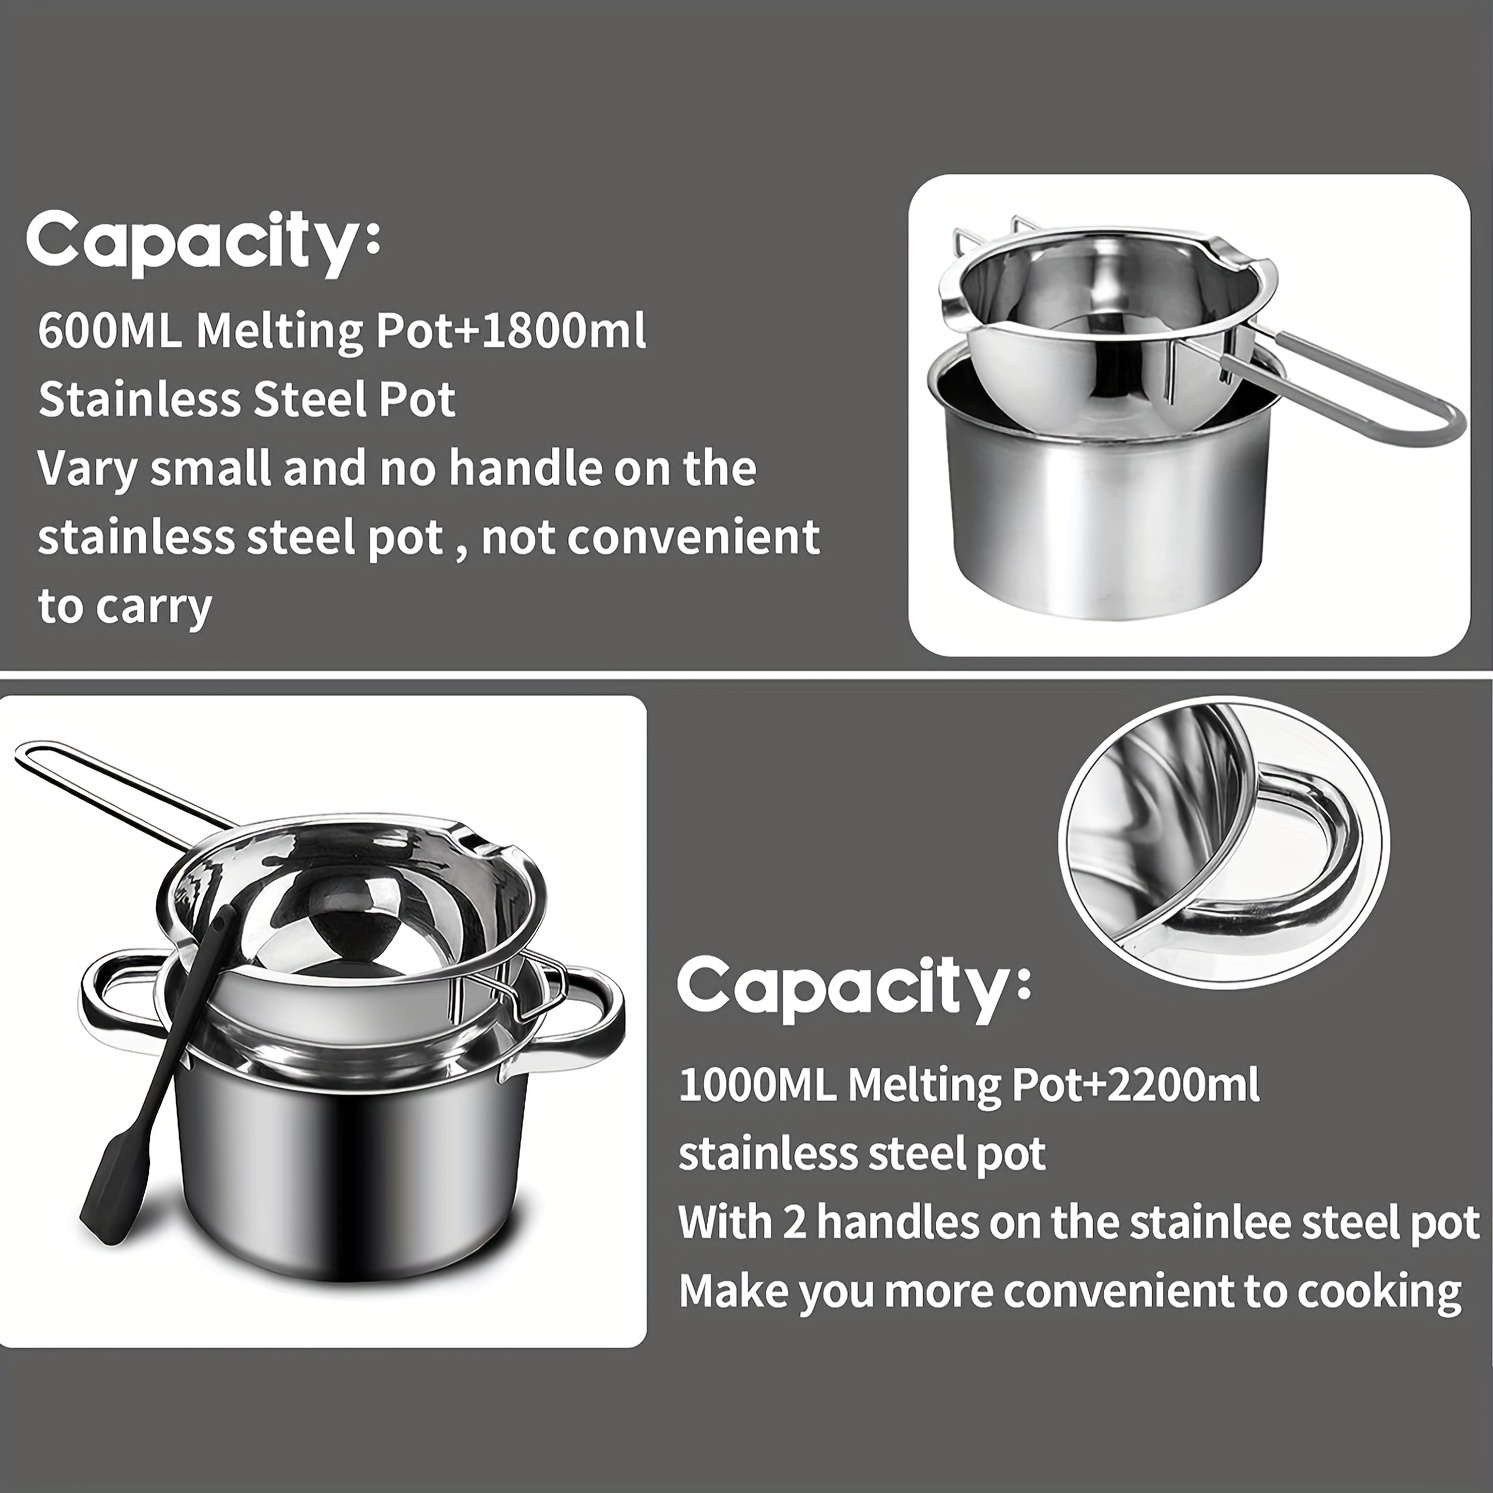 Double Boiler Pot Set, Stainless Steel Melting Pot With Silicone Spatula  For Melting Chocolate, Soap, Wax, Candle Making 600ml And 1600ml